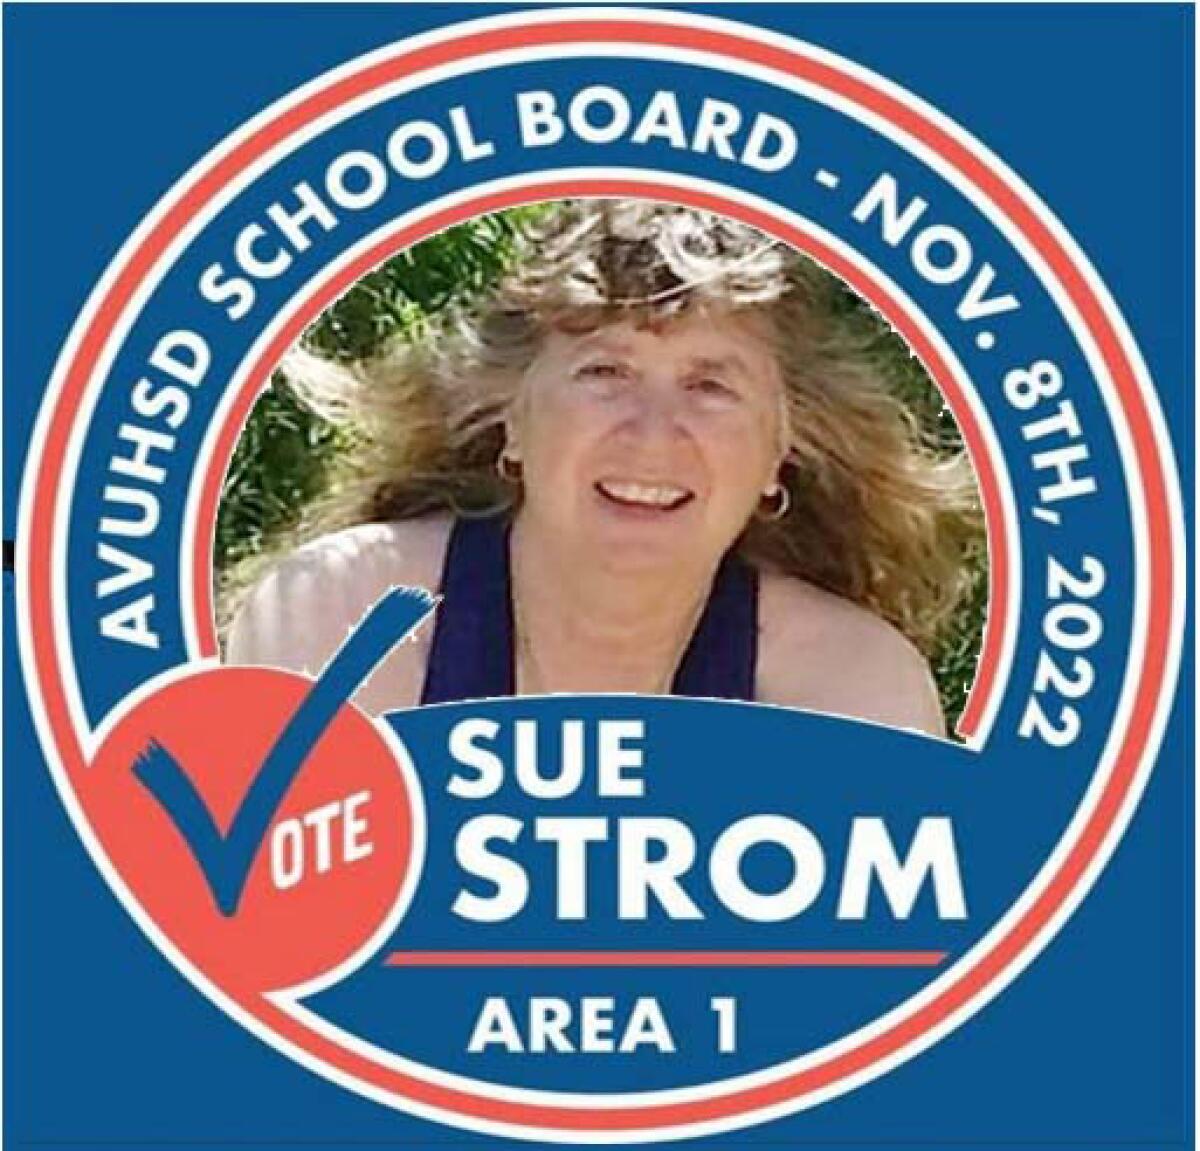 Political advertisement image of Antelope Valley School Board candidate Susan Strom.